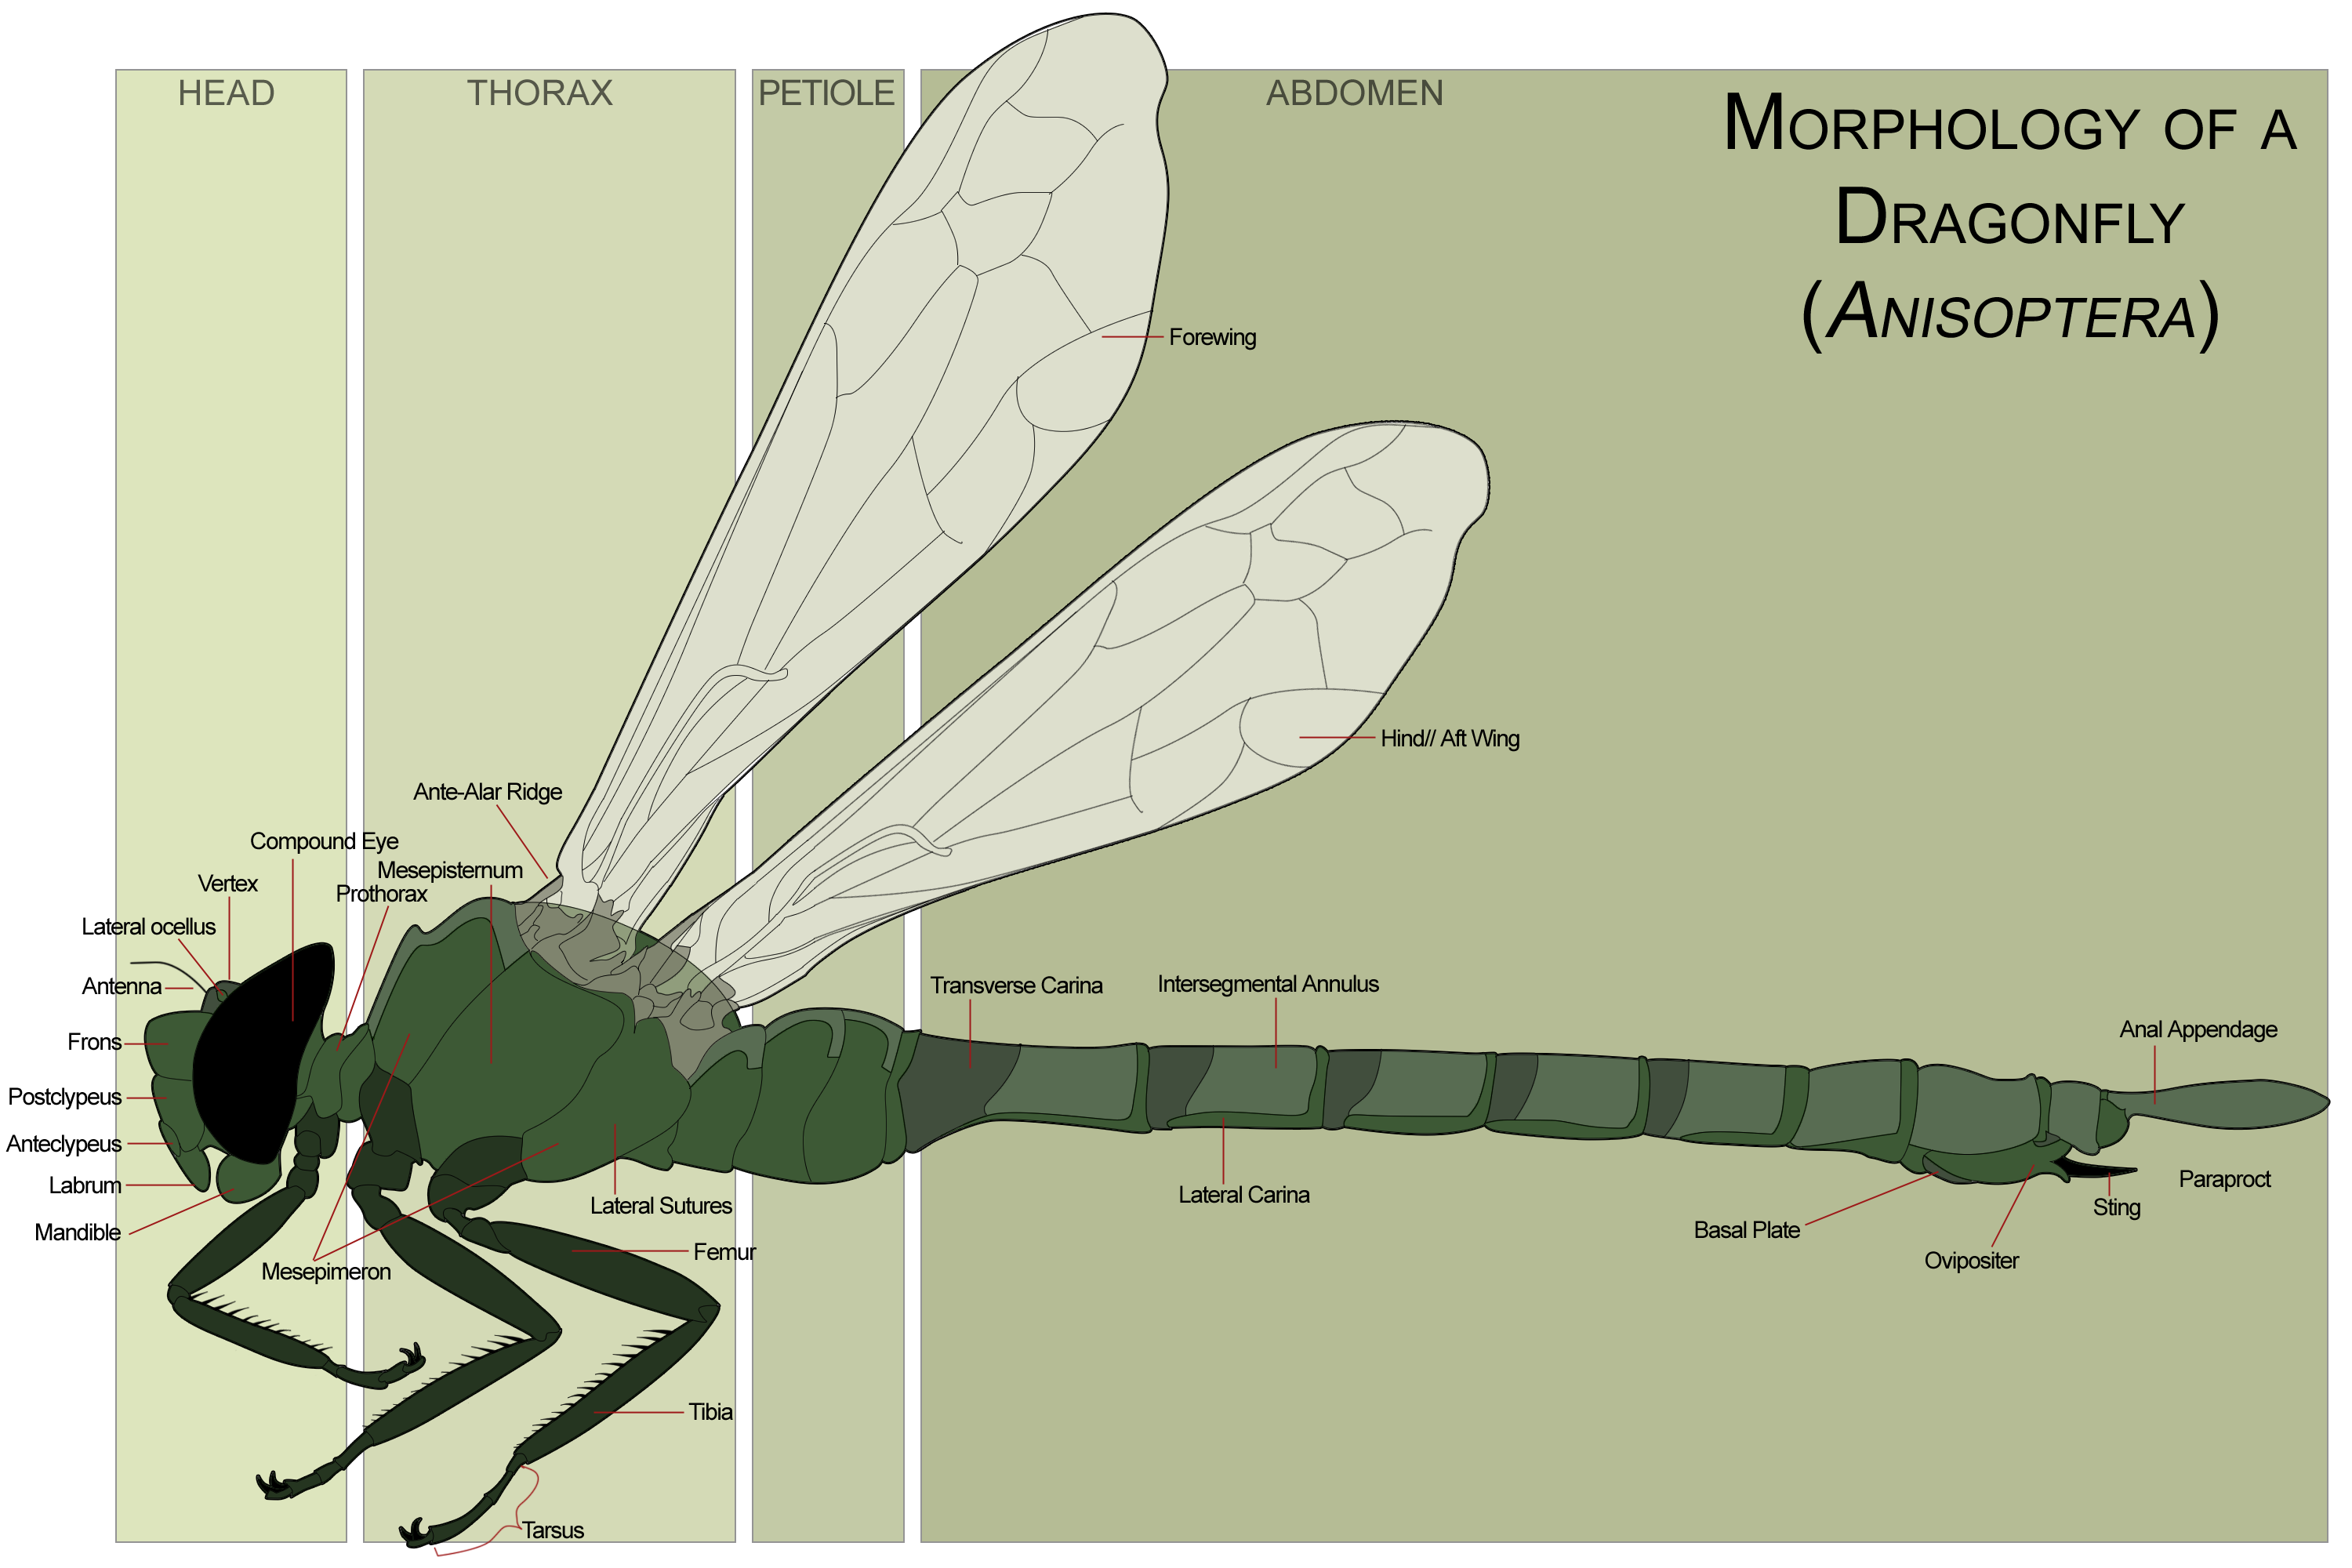 File:Dragonfly morphology.png - Wikipedia, the free encyclopedia